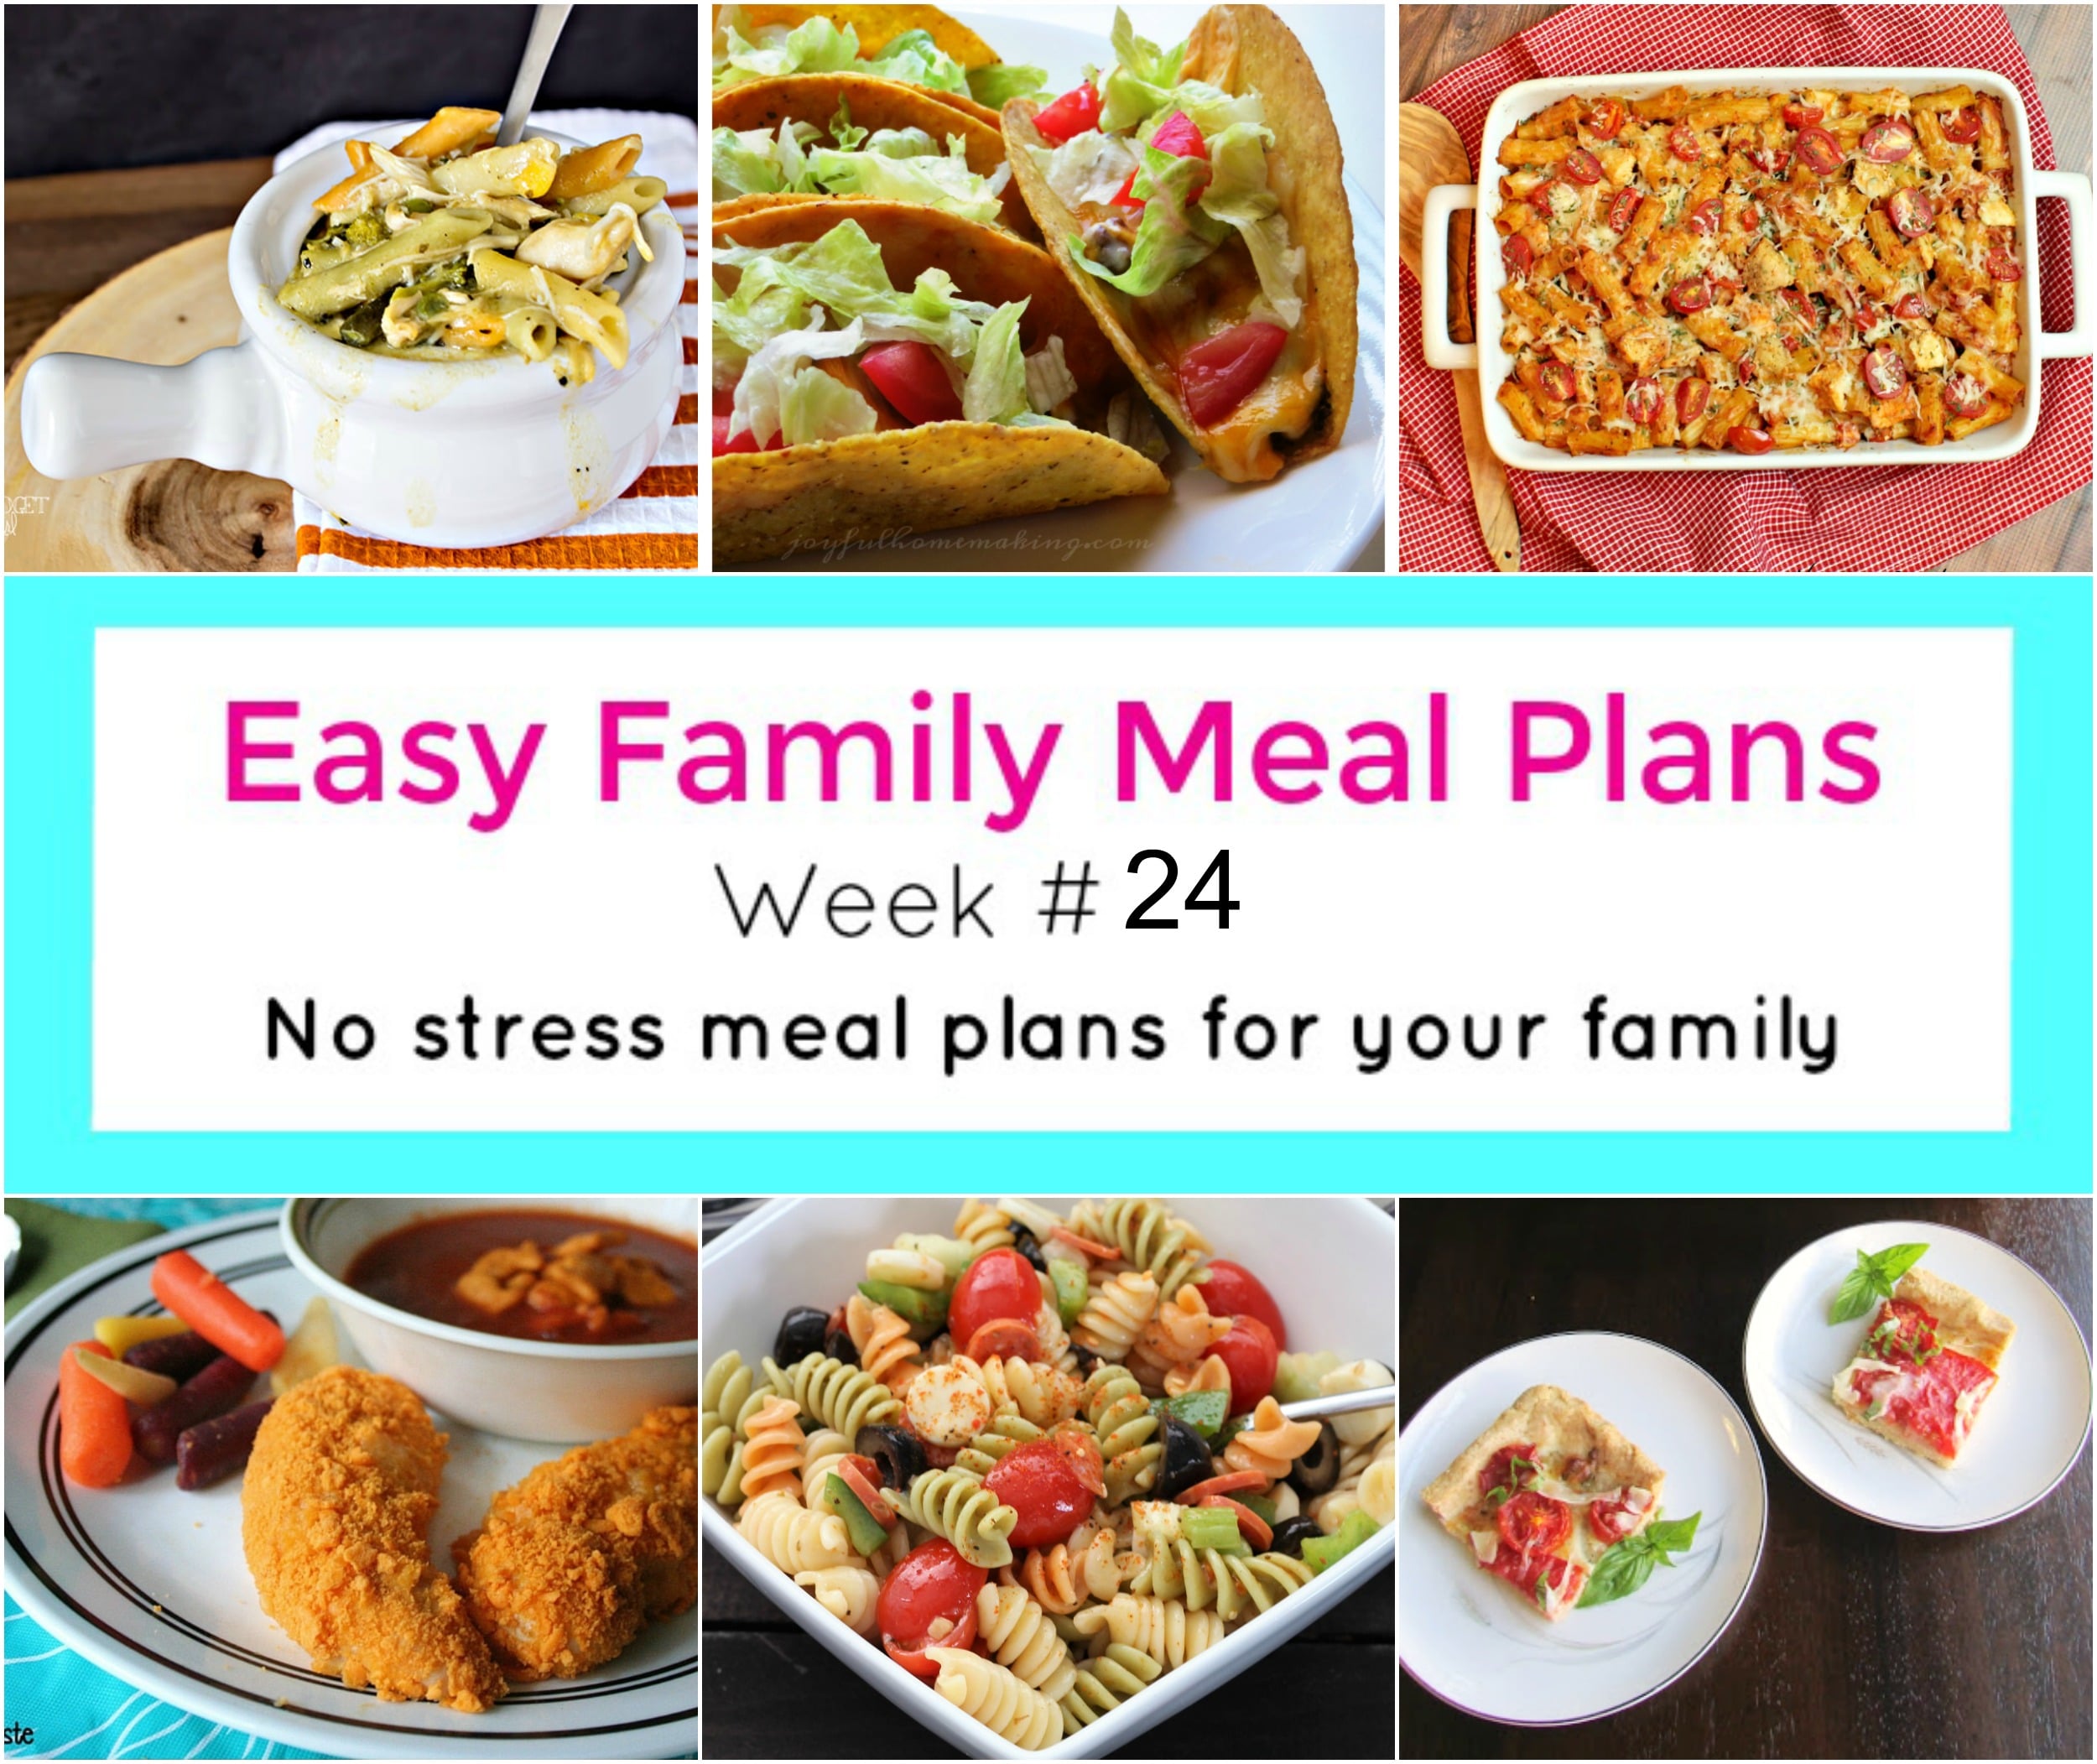 Easy Family Meal Plans 24 - New South Charm